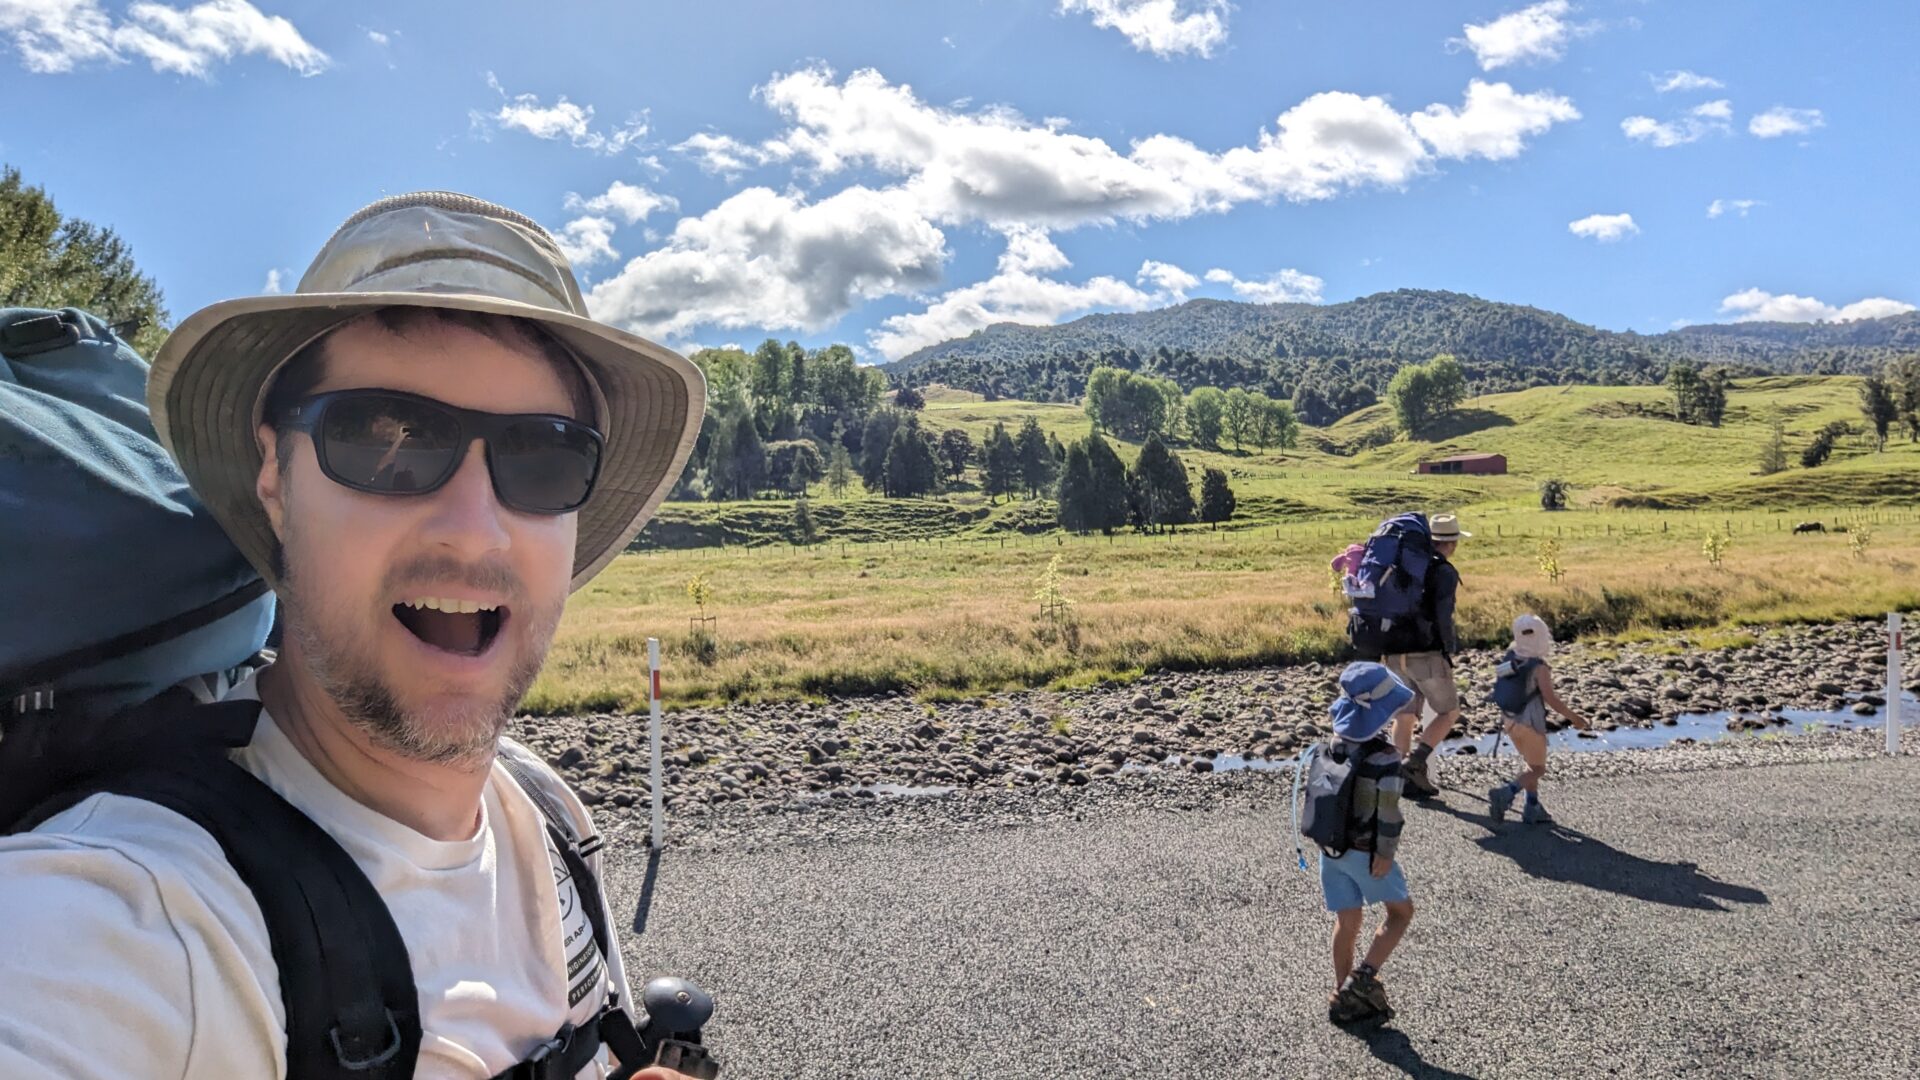 New Zealand: Reflecting on 6 Months of “Deep Travel”